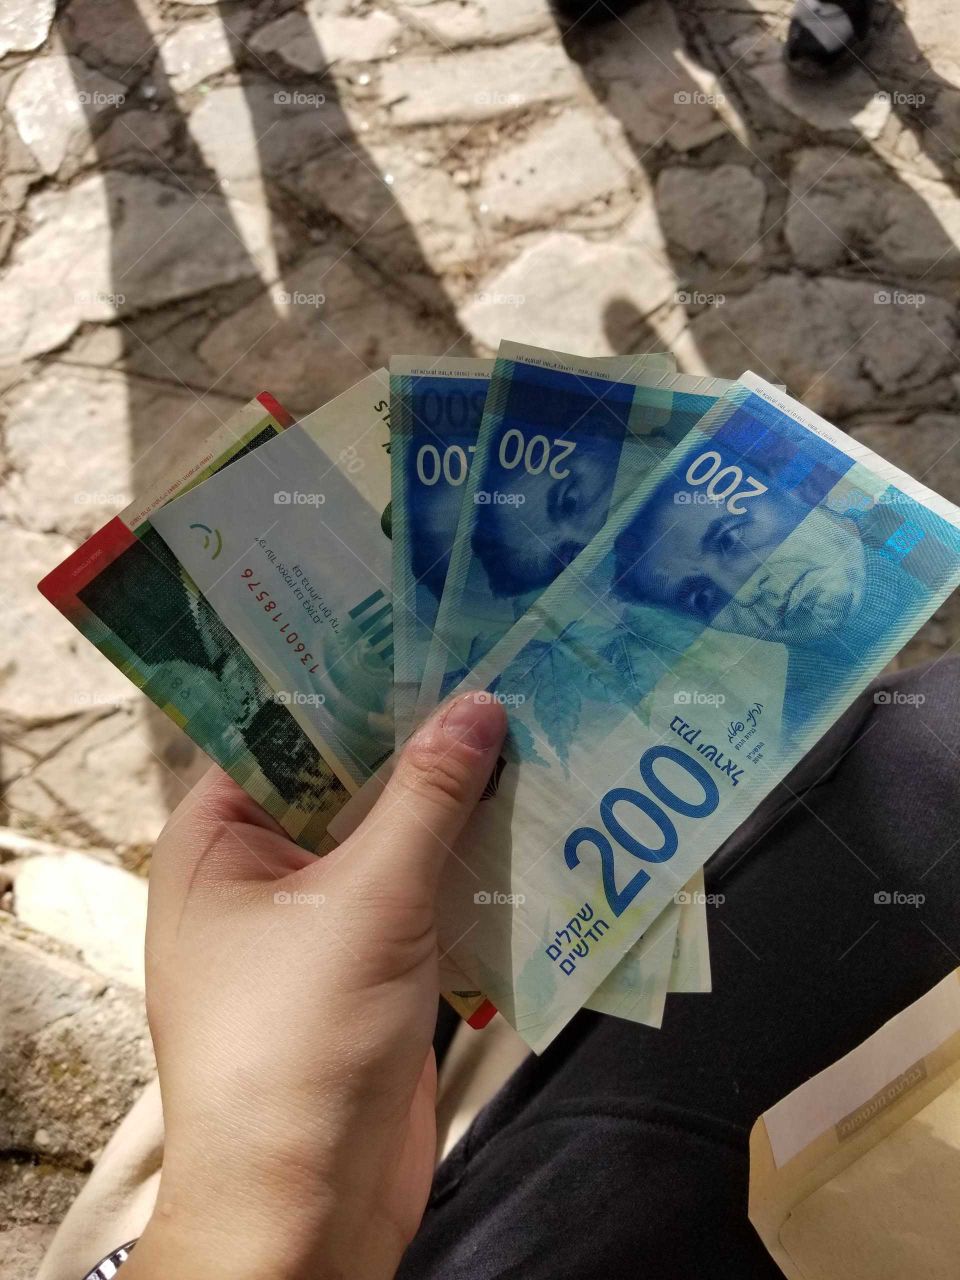 These are Israeli Shekels. They come in all different colors. These Shekels are blue and red. These would amount to ove 600 Shekels.